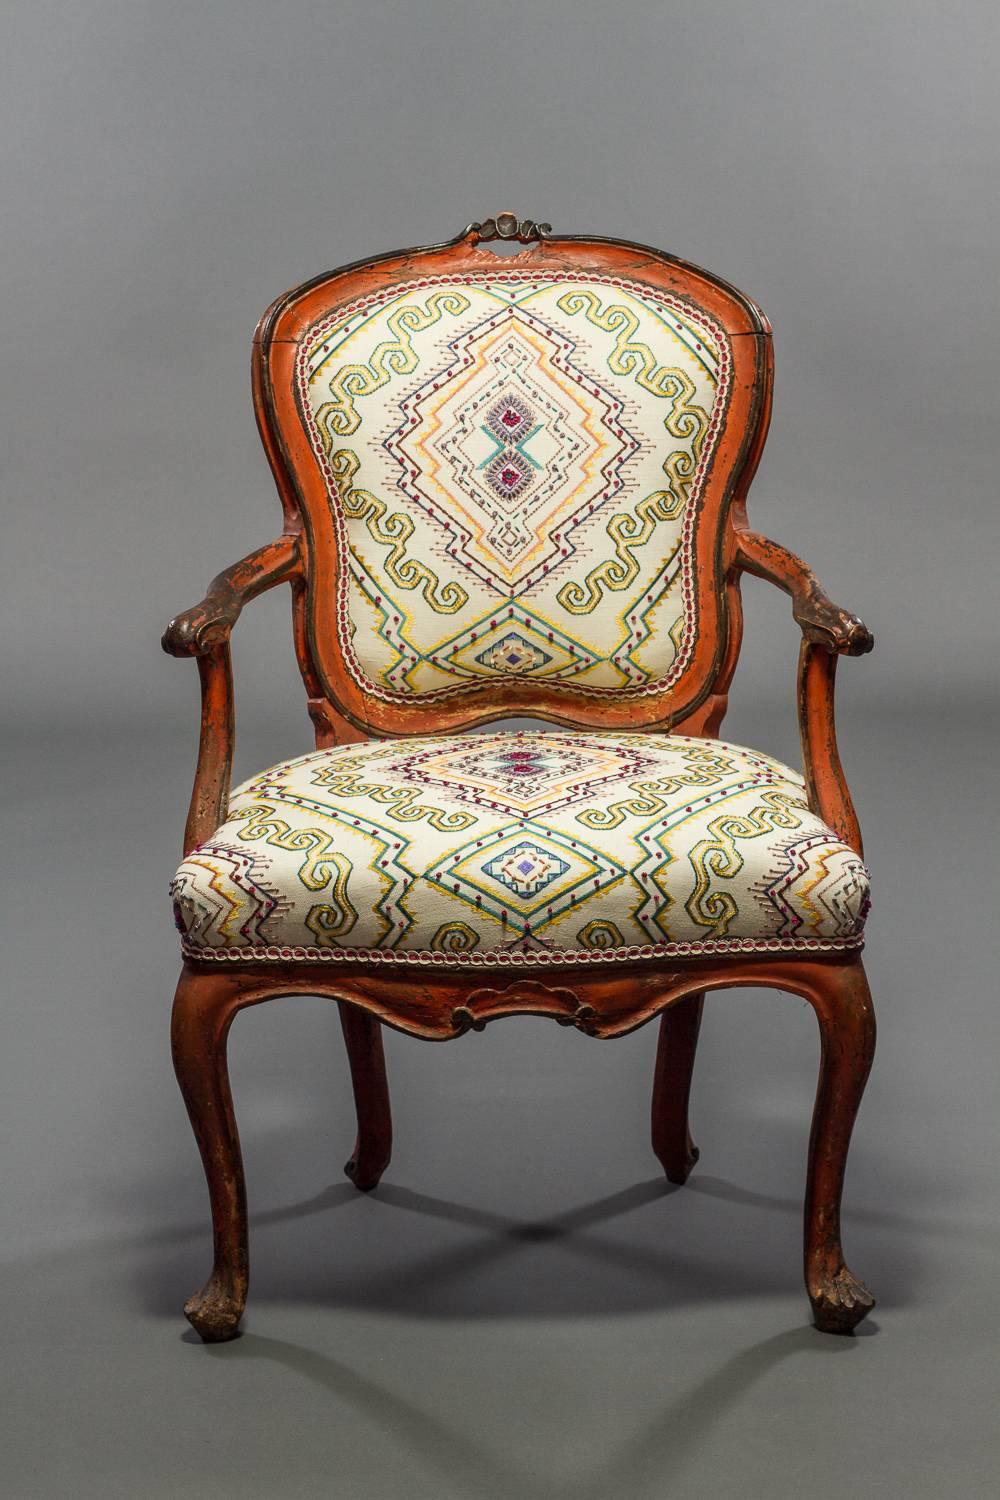 Reupholstered with custom embroidered fabric.  Provenance: sold Sotheby's, early 20th century, The Estate of Charles Ryskamp. From an estate in Corning, NY.